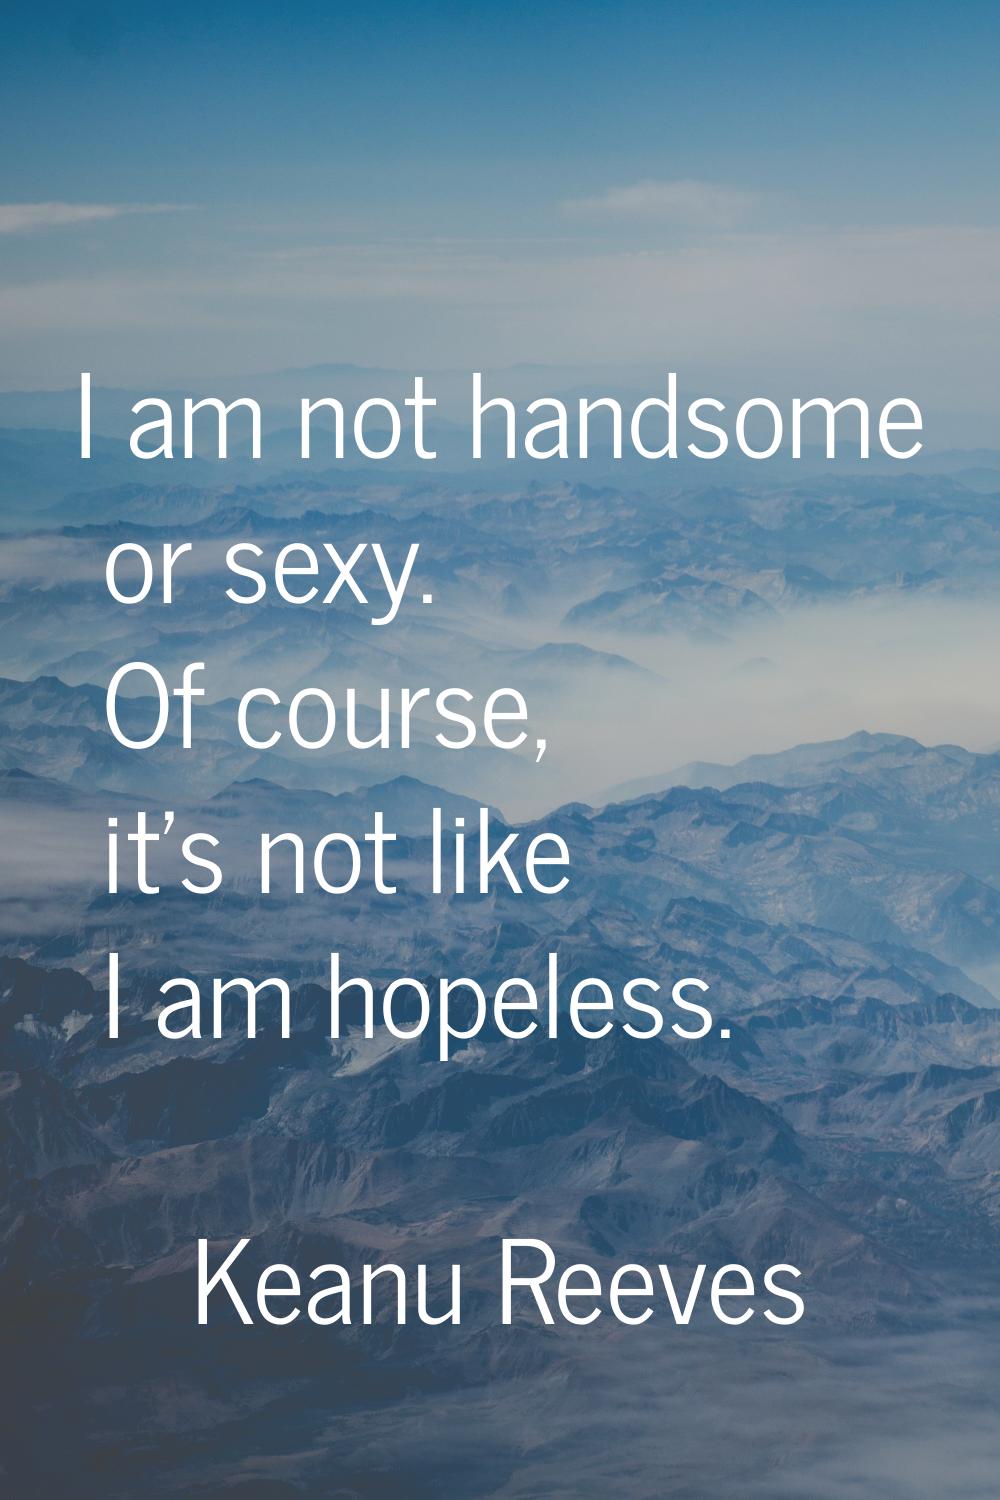 I am not handsome or sexy. Of course, it's not like I am hopeless.